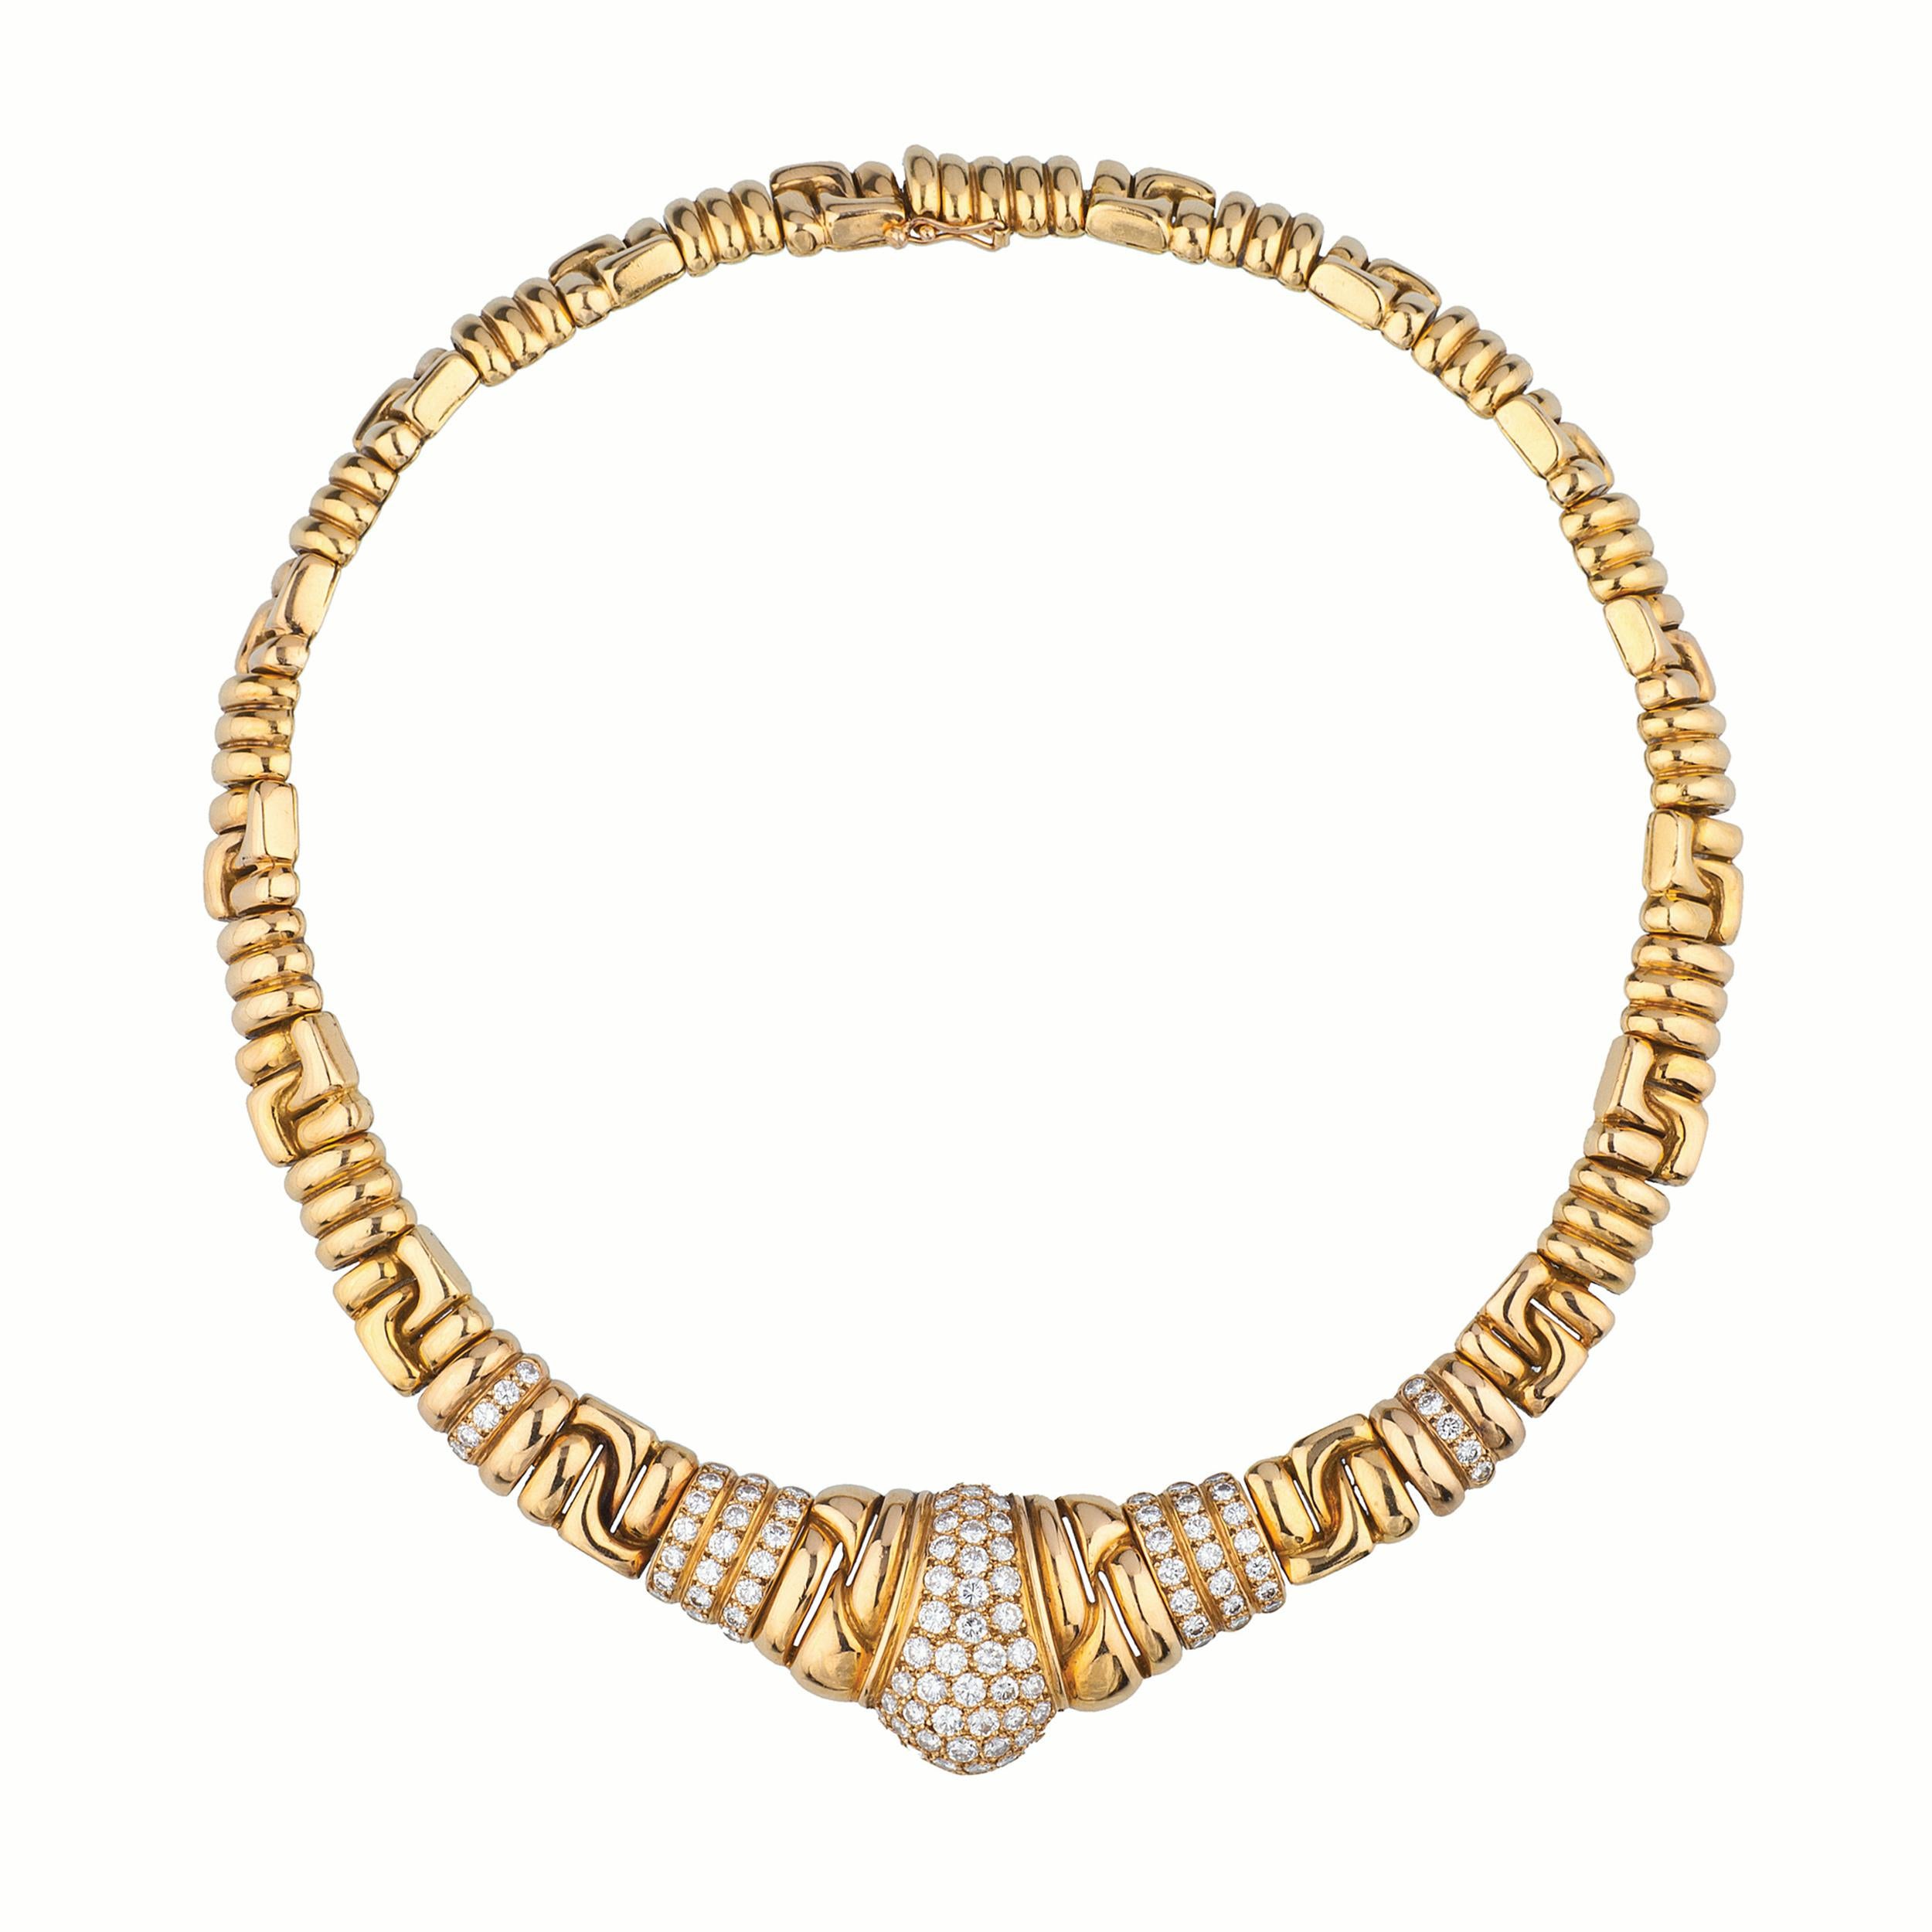 18k Boucheron Necklace & Ring Suite with 116 round diamonds weighing approximately 3.00 carats